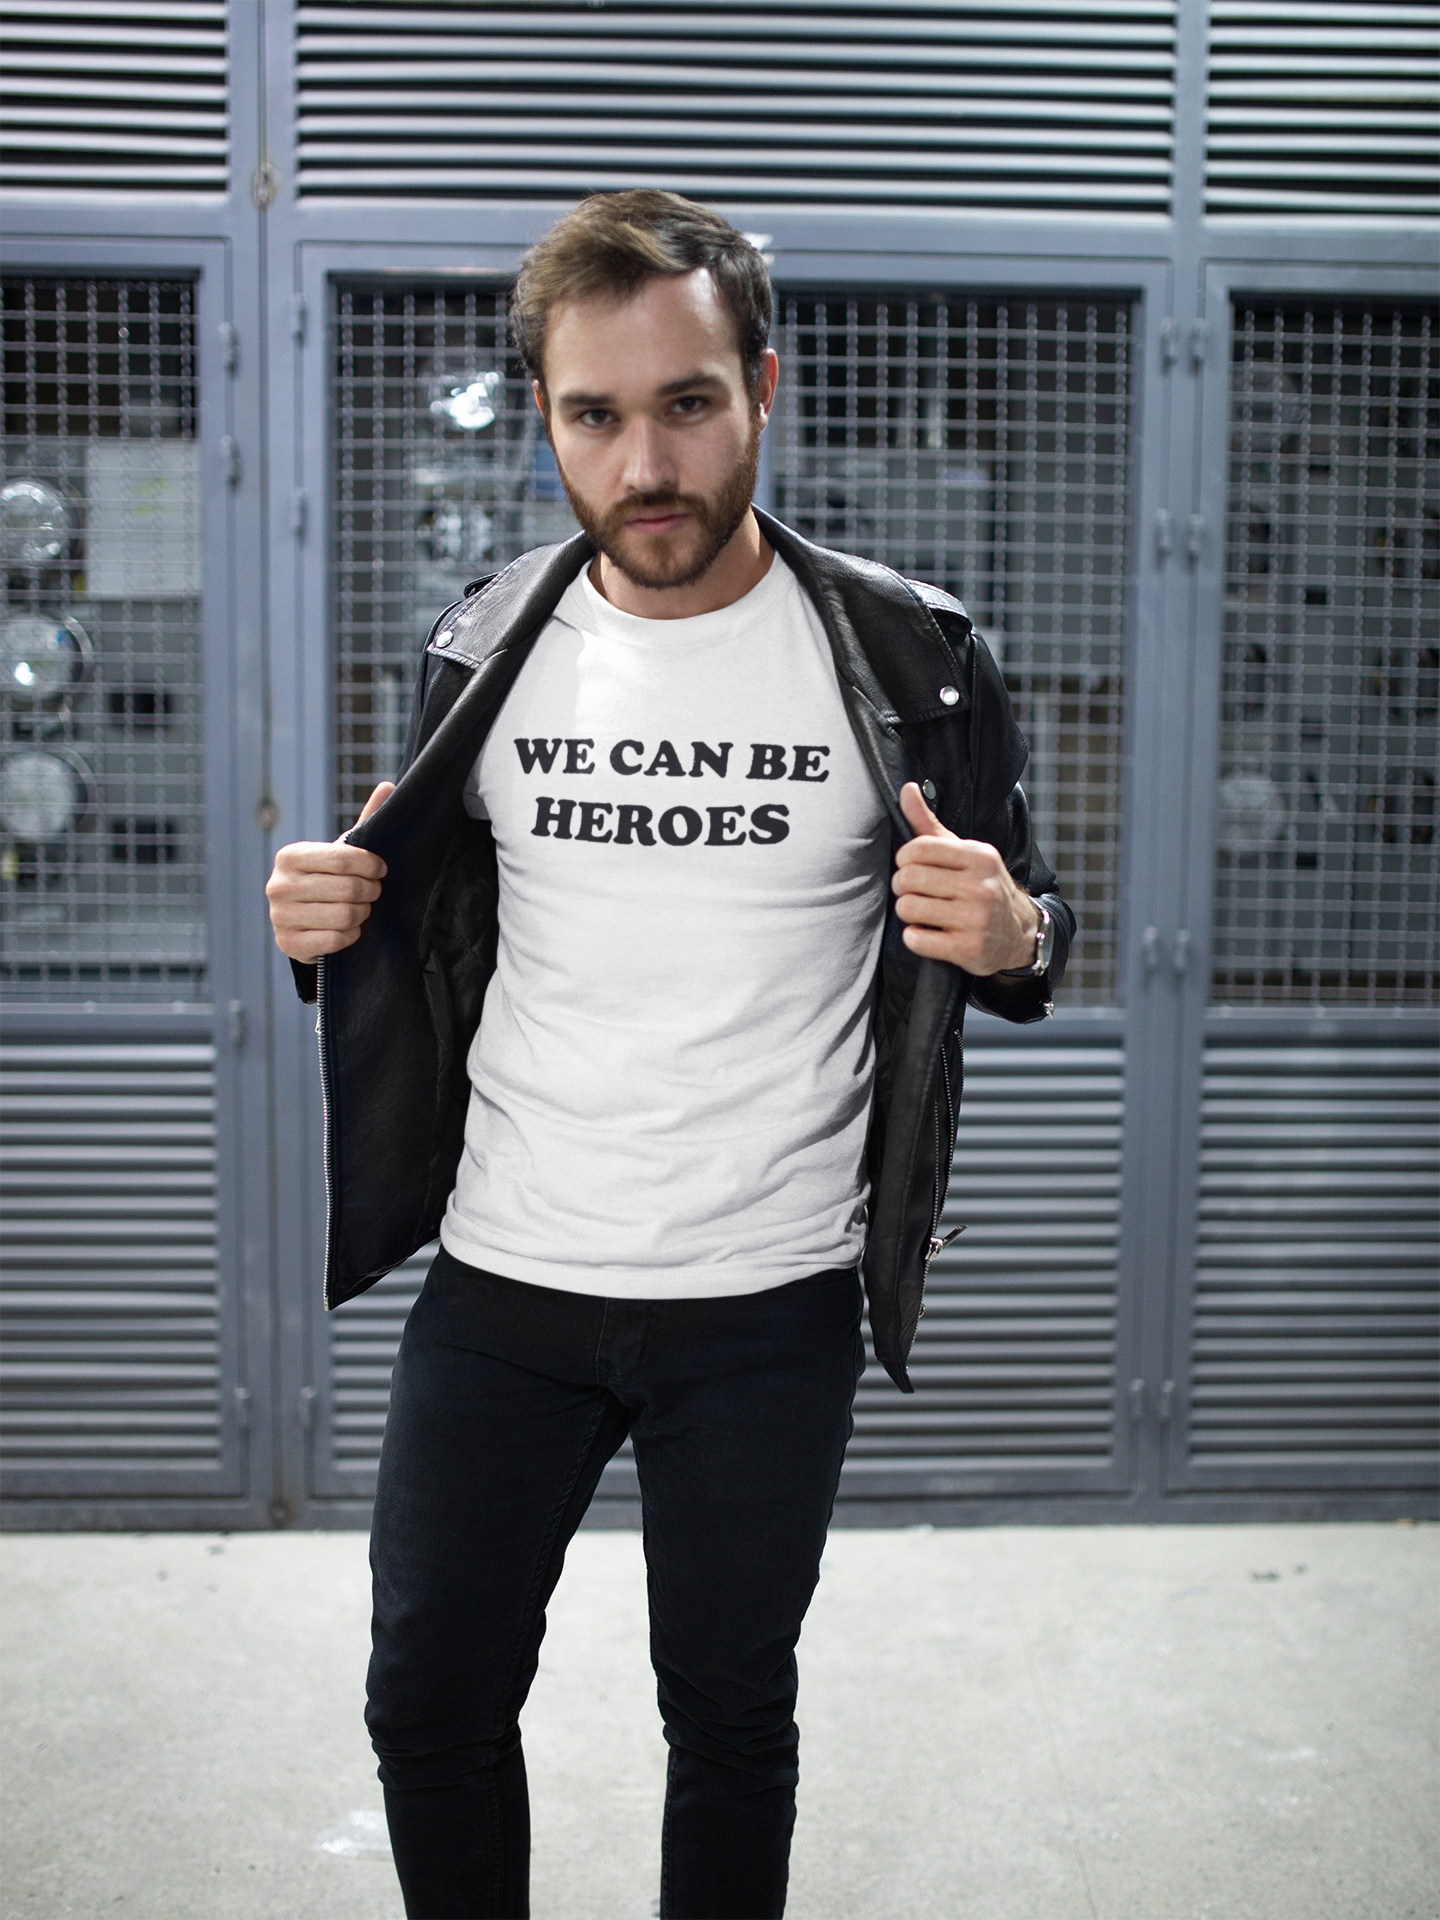 WE CAN BE HEROES Embroidered Unisex organic cotton t-shirt